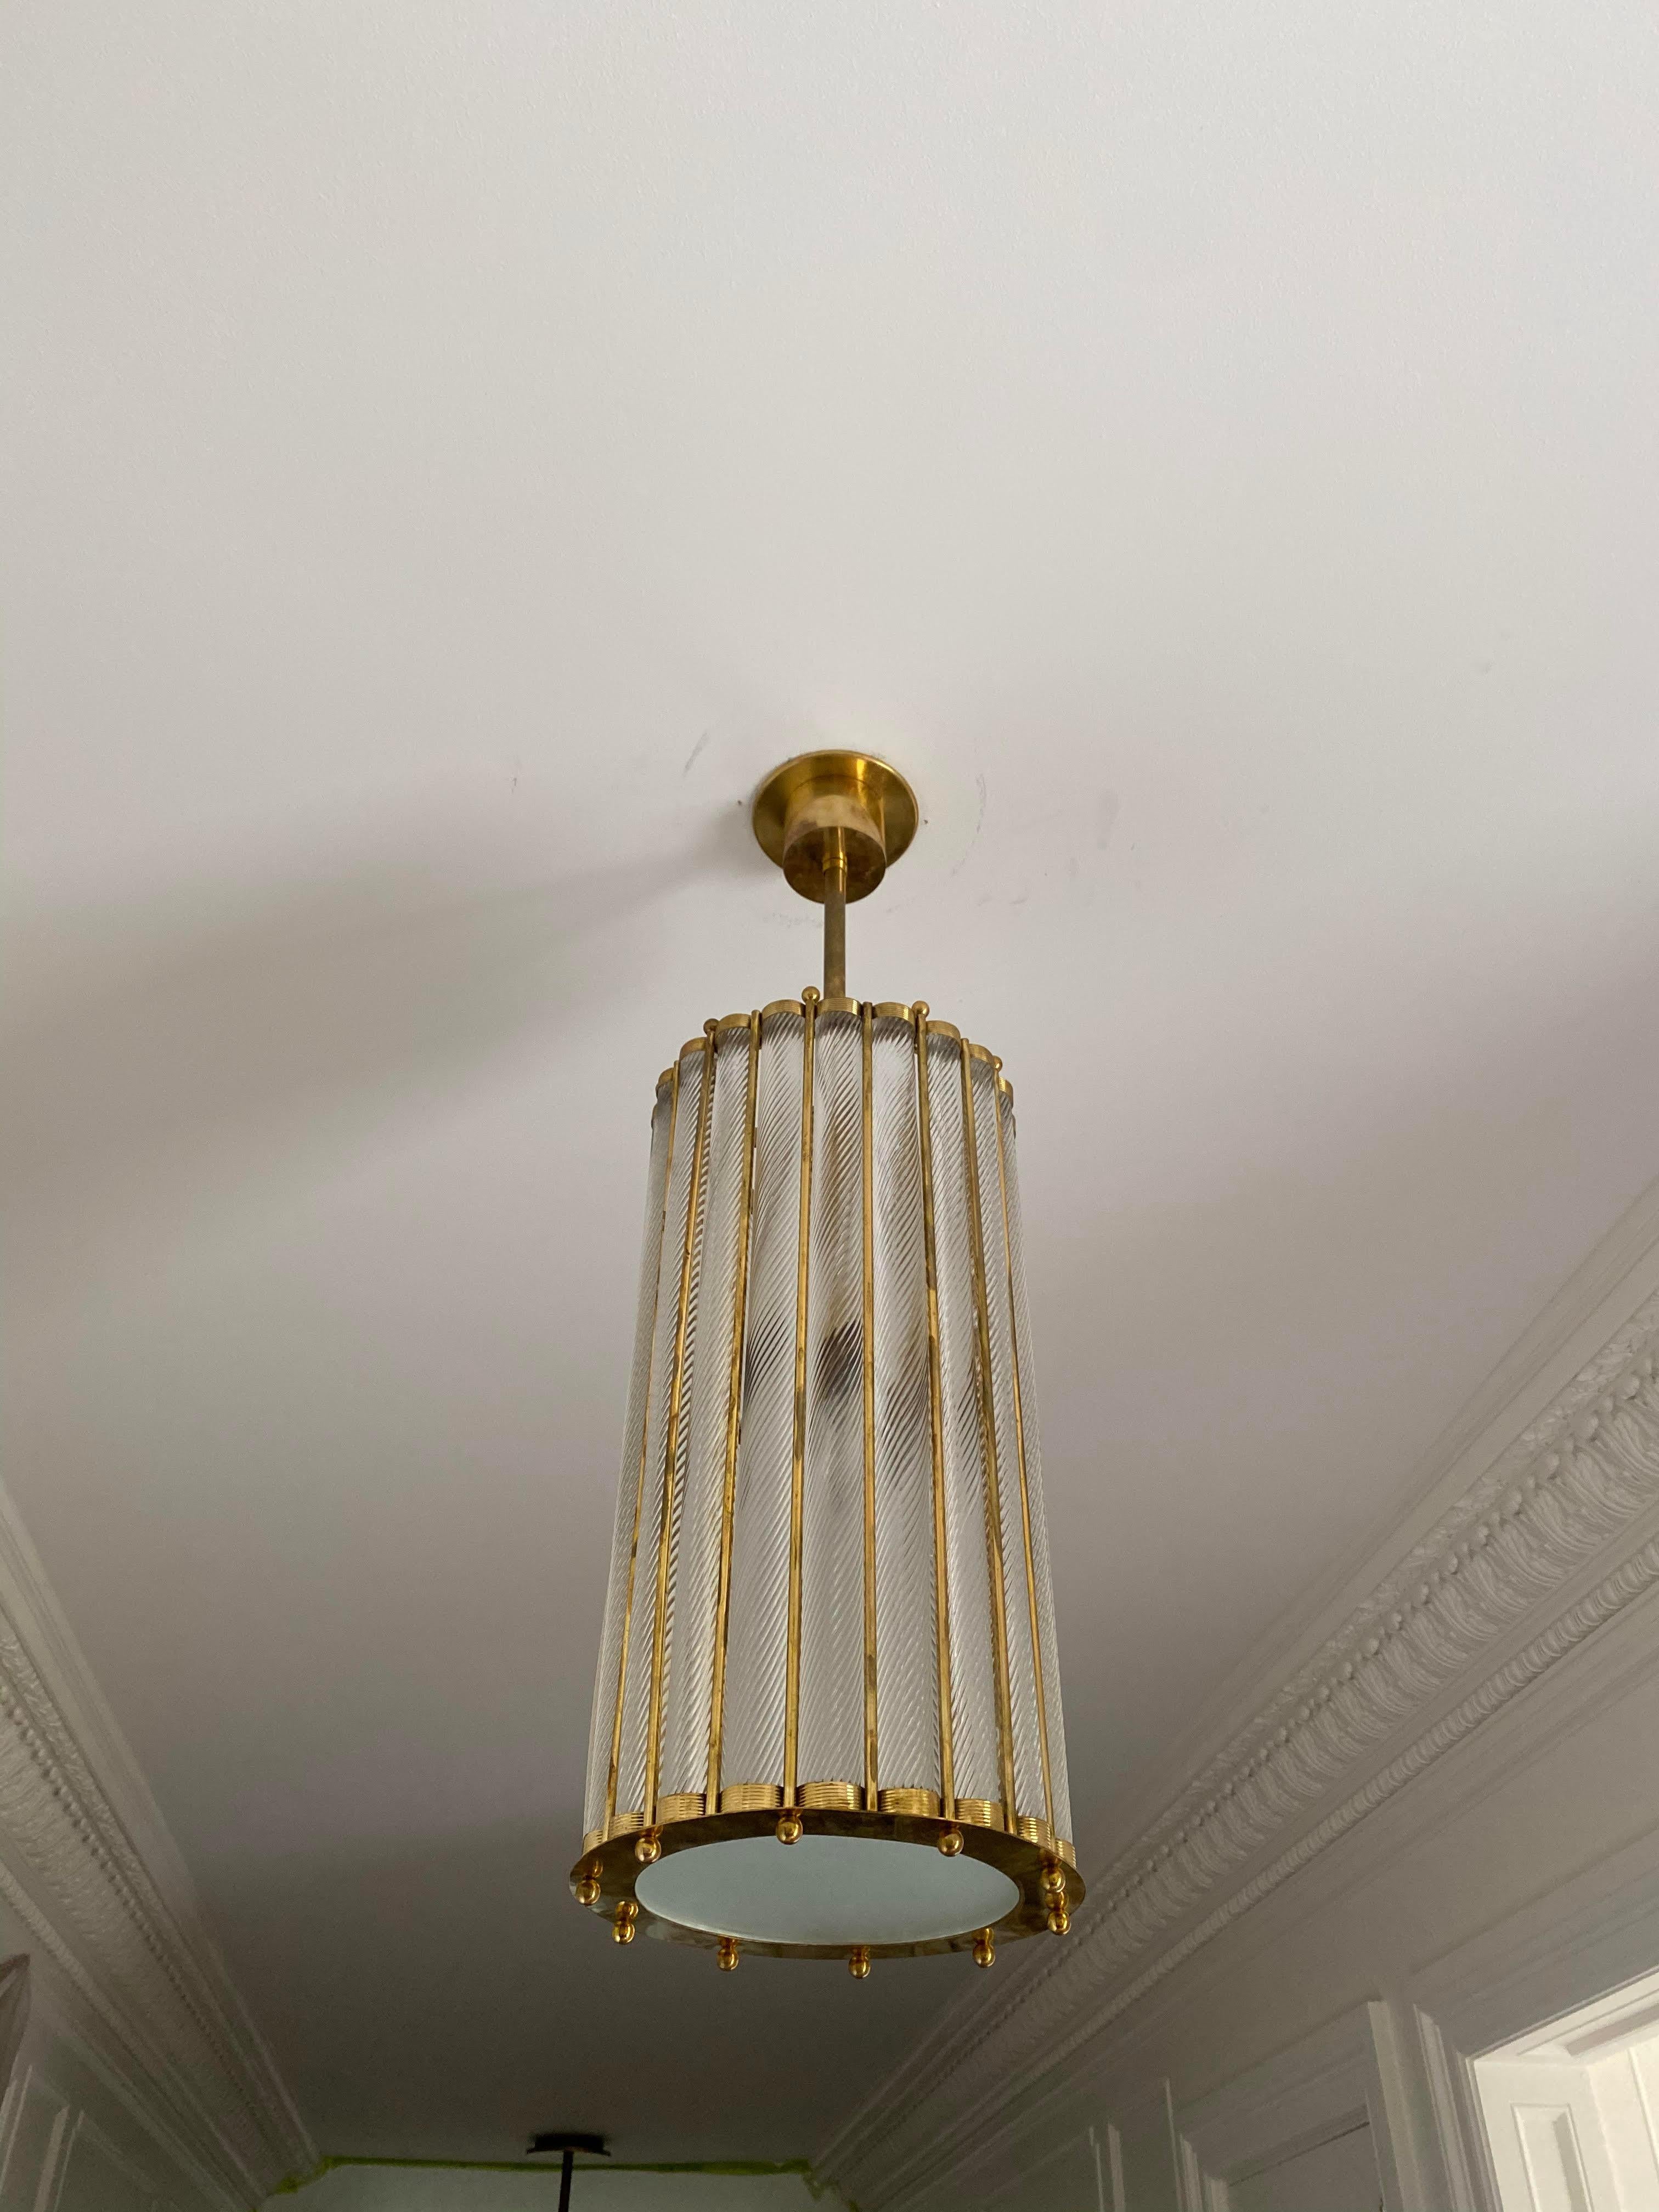 Price is per individual lantern, 1 is available now and ready to ship from NYC. Contemporary Italian Art Deco Design round lantern / chandelier, entirely handcrafted, customizable in height, diameter, and finishes, the nicely scalloped airy brass